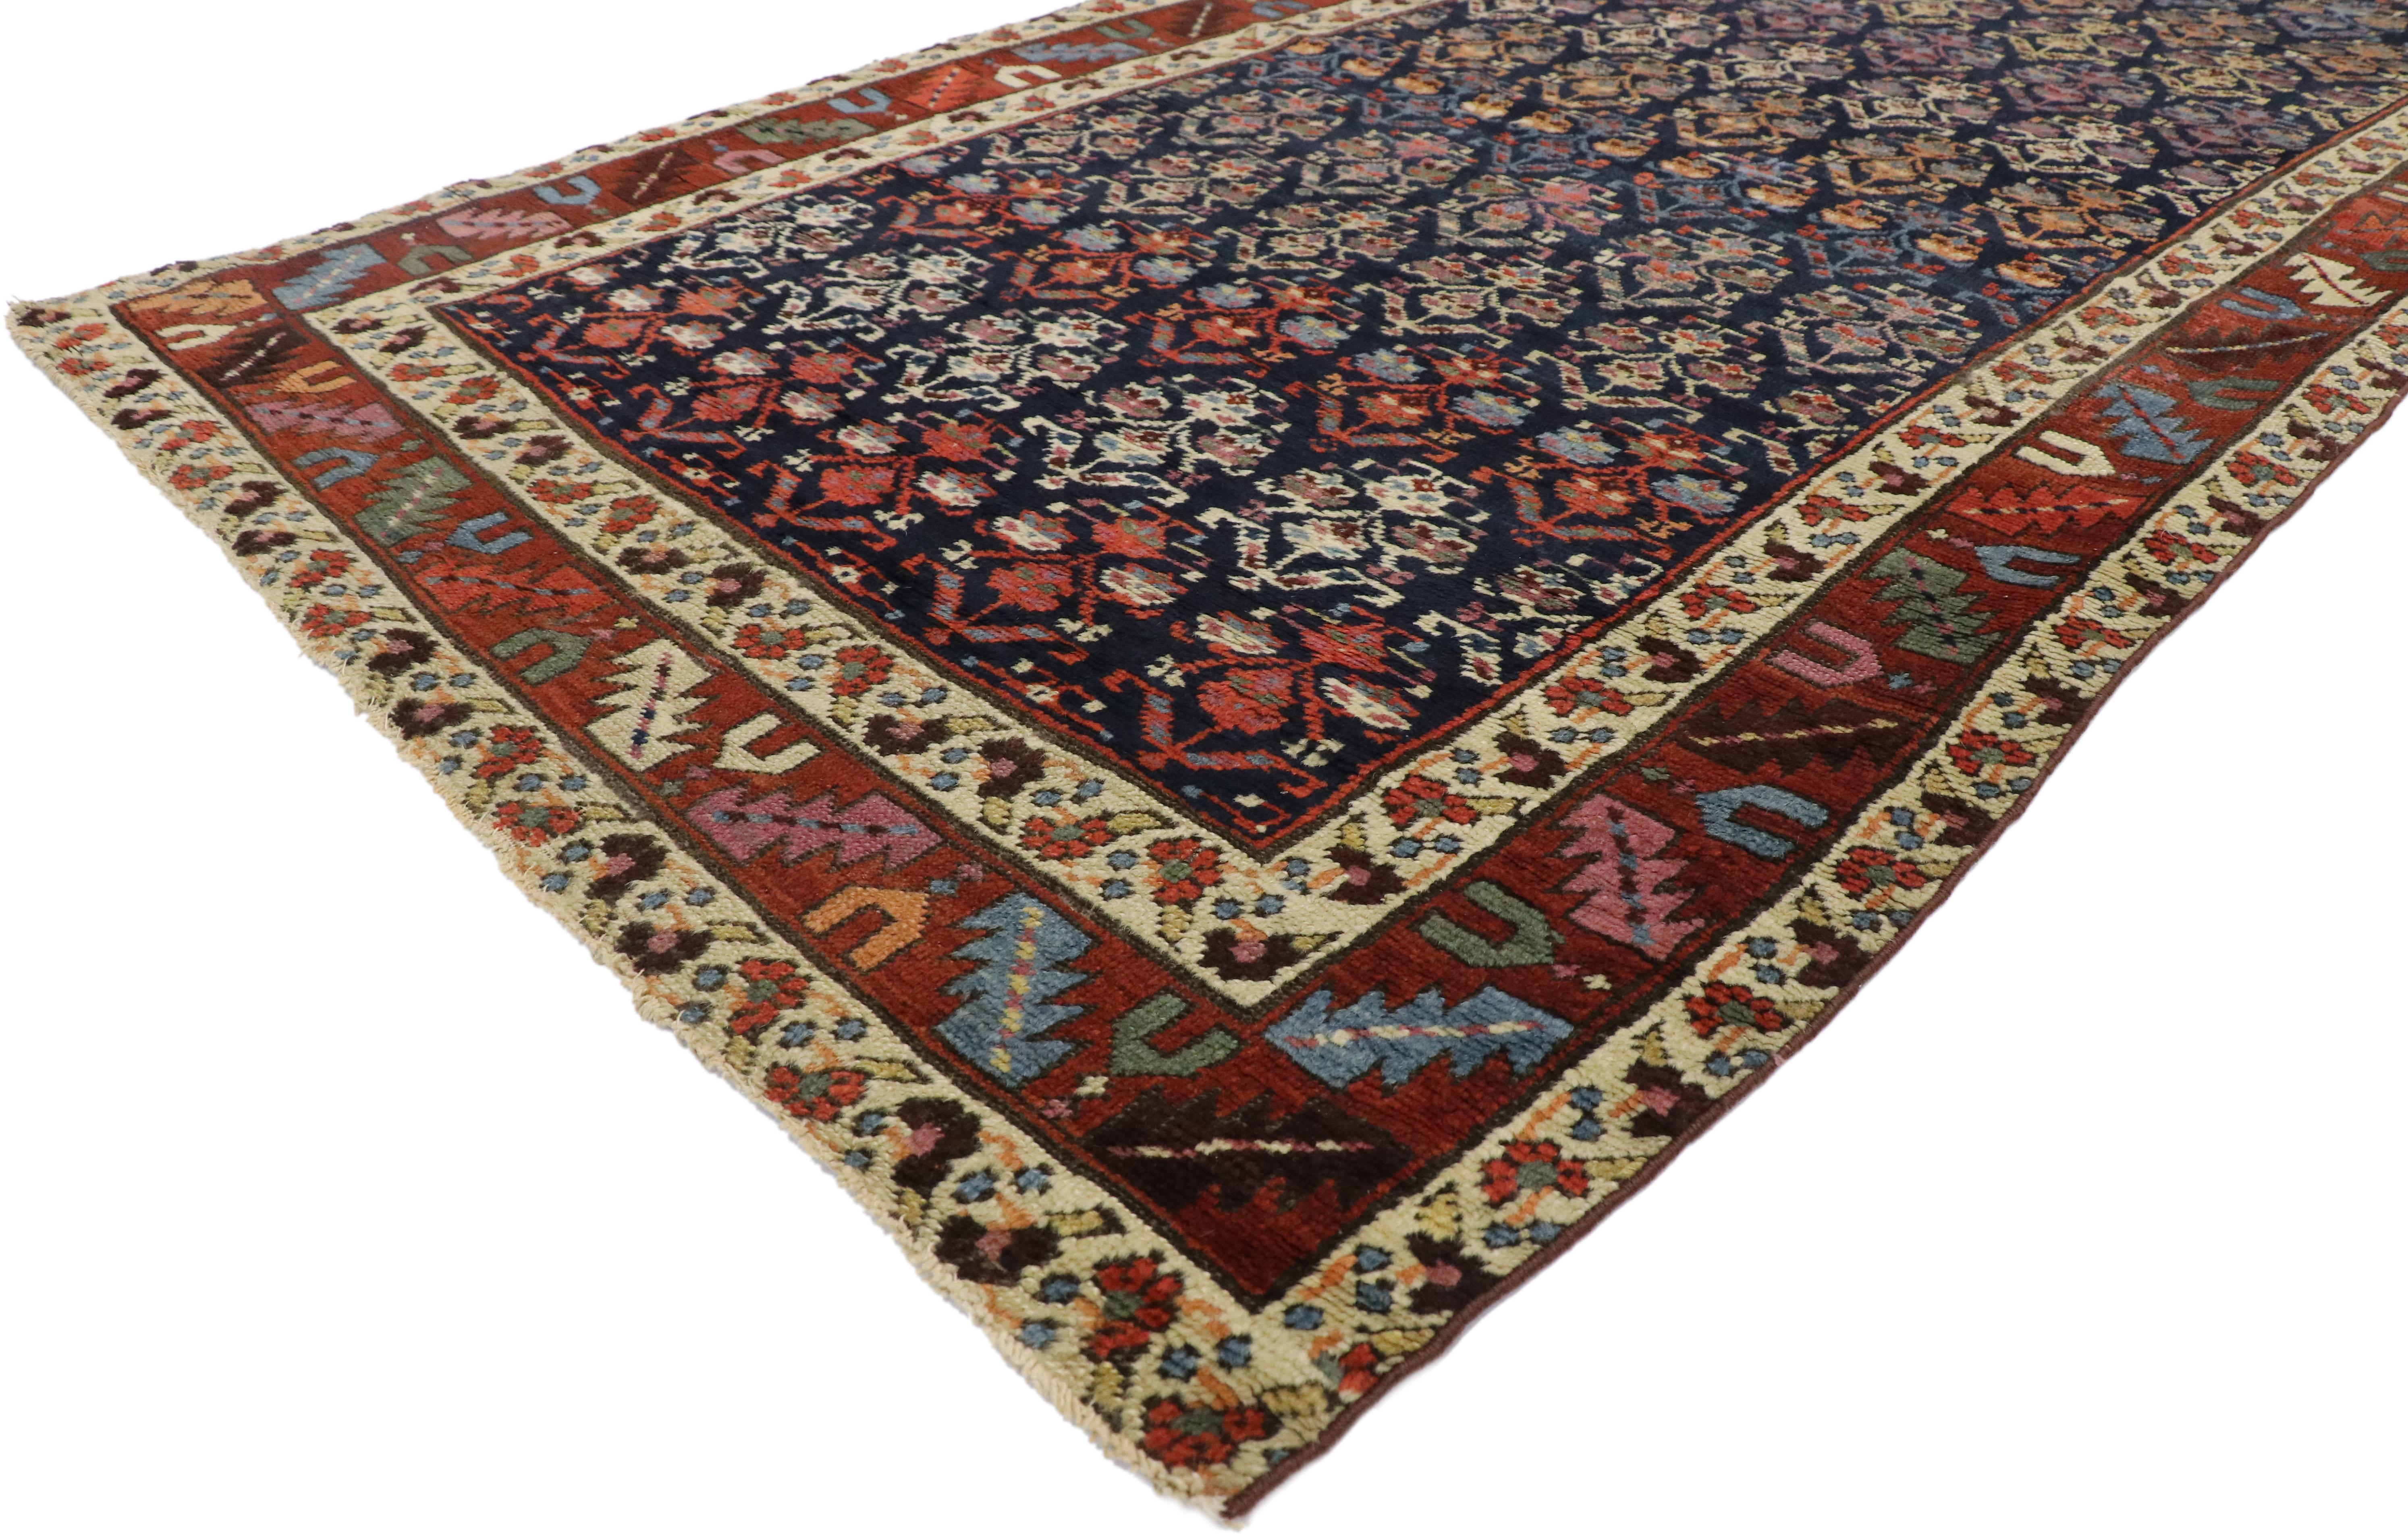 71046 Antique Caucasian Shirvan Runner with Boteh Pattern and Modern Federal Style. With its clean lines and subtle use of ornament, this hand knotted wool antique Caucasian Shirvan runner beautifully embodies classically refined Federal style. The